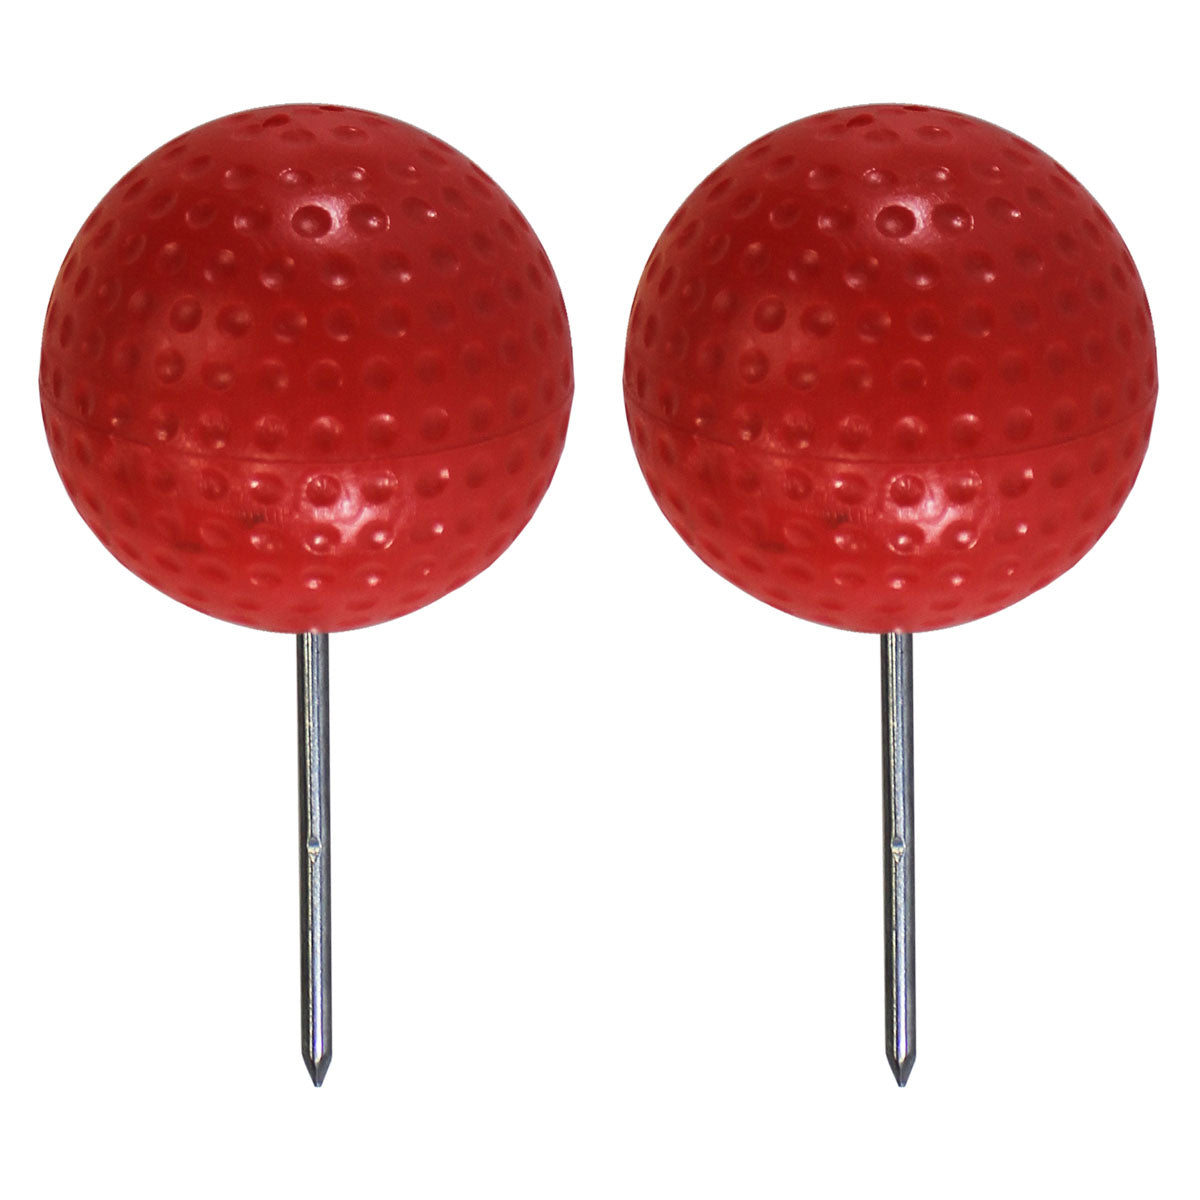 3" Round Solid Tee Marker - Set of 2 Tee Markers